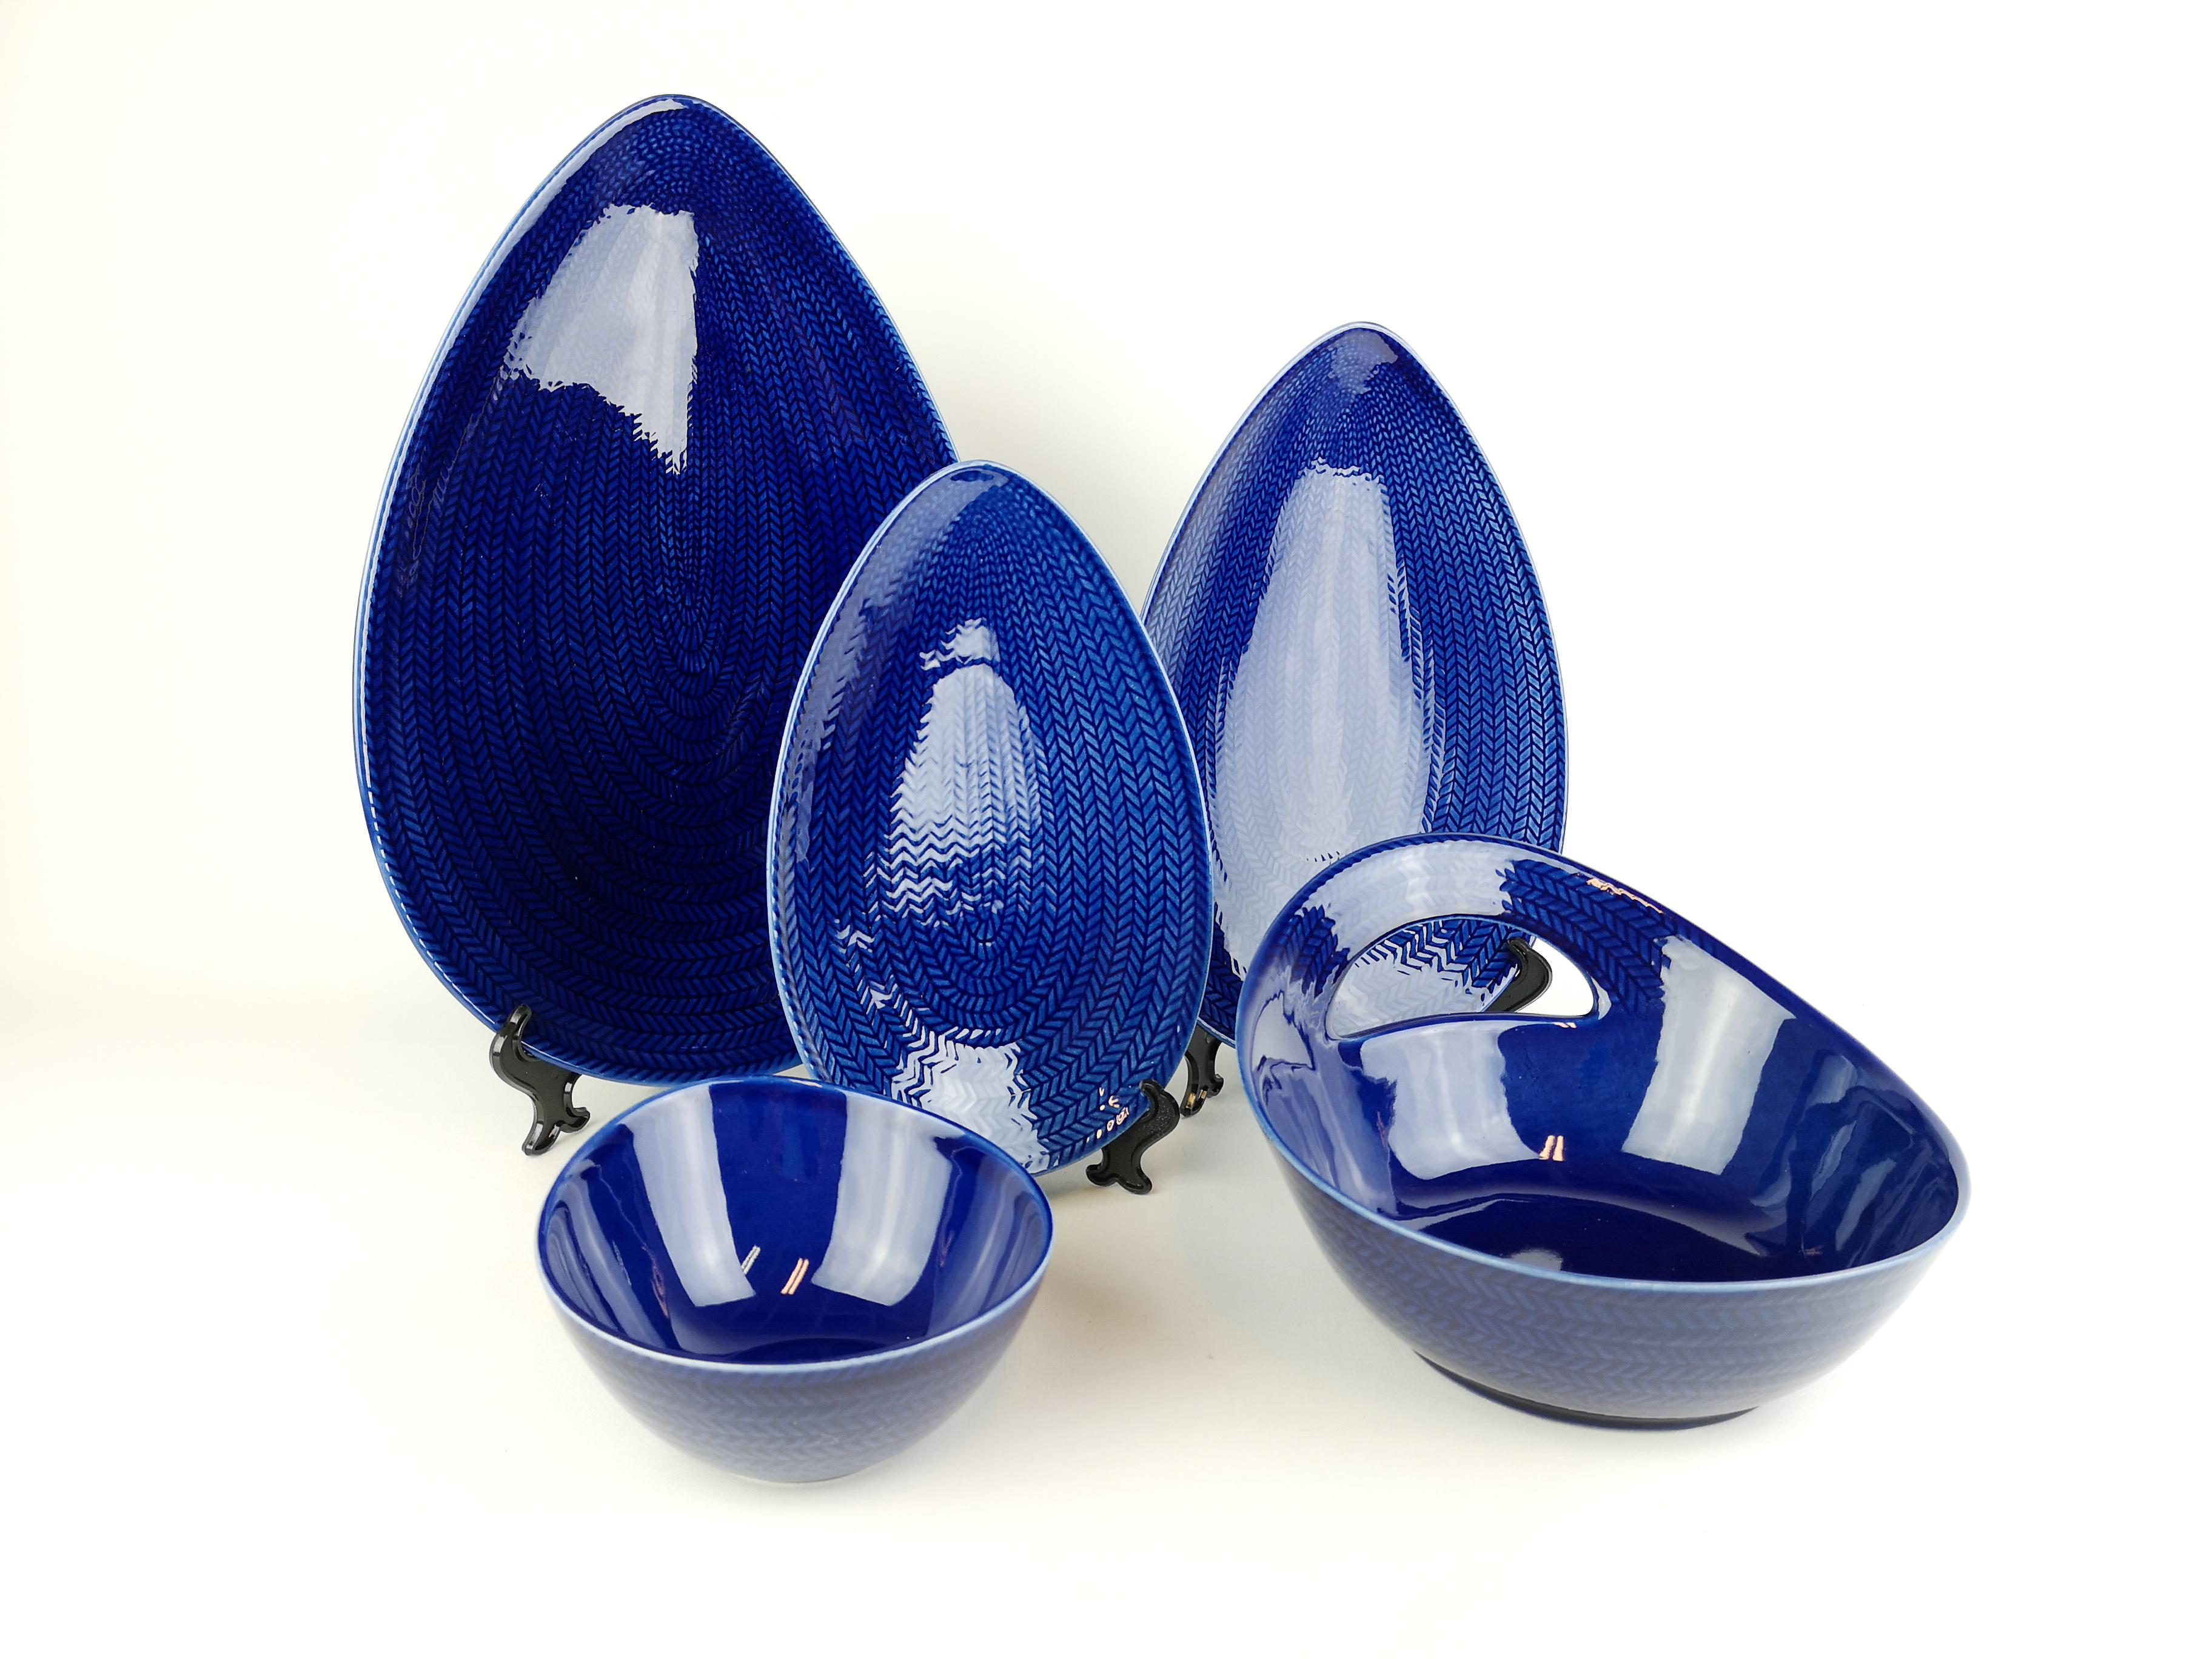 These wonderful severing plates and bowls are beautiful patterned and in fantastic blue color. The designer Hertha Bengtson was in here prime when she designed the series of Blue Fire. 

